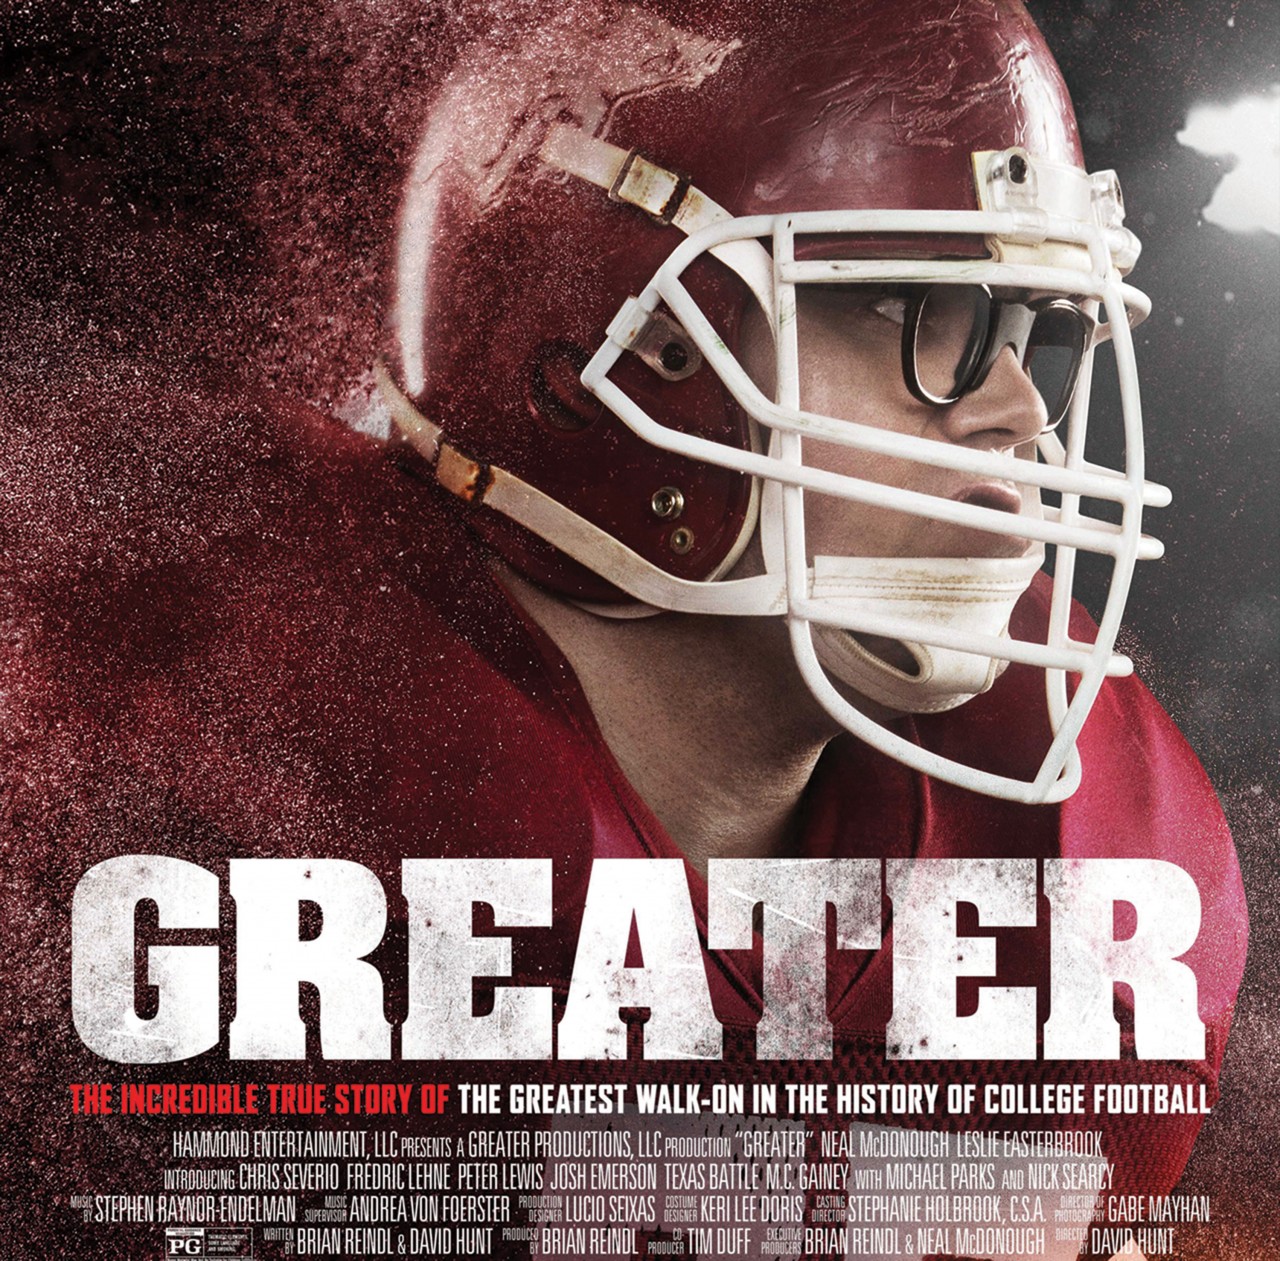 Football film ‘Greater’ released on DVD Dec. 20